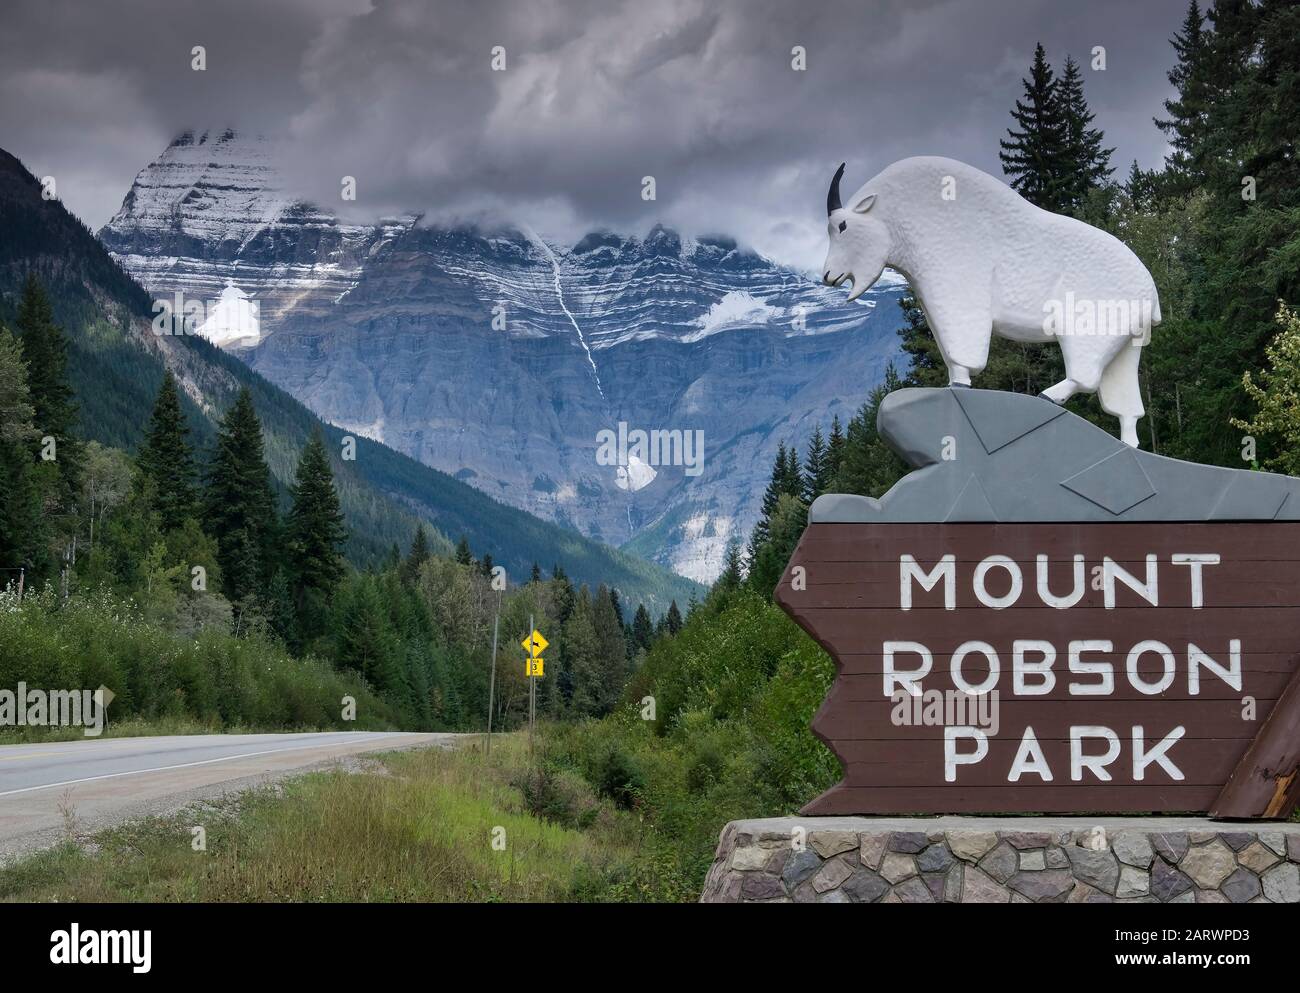 Mount Robson Park sign backed by Mount Robson, Mount Robson Provincial Park, Canadian Rockies, British Columbia, Canada Stock Photo